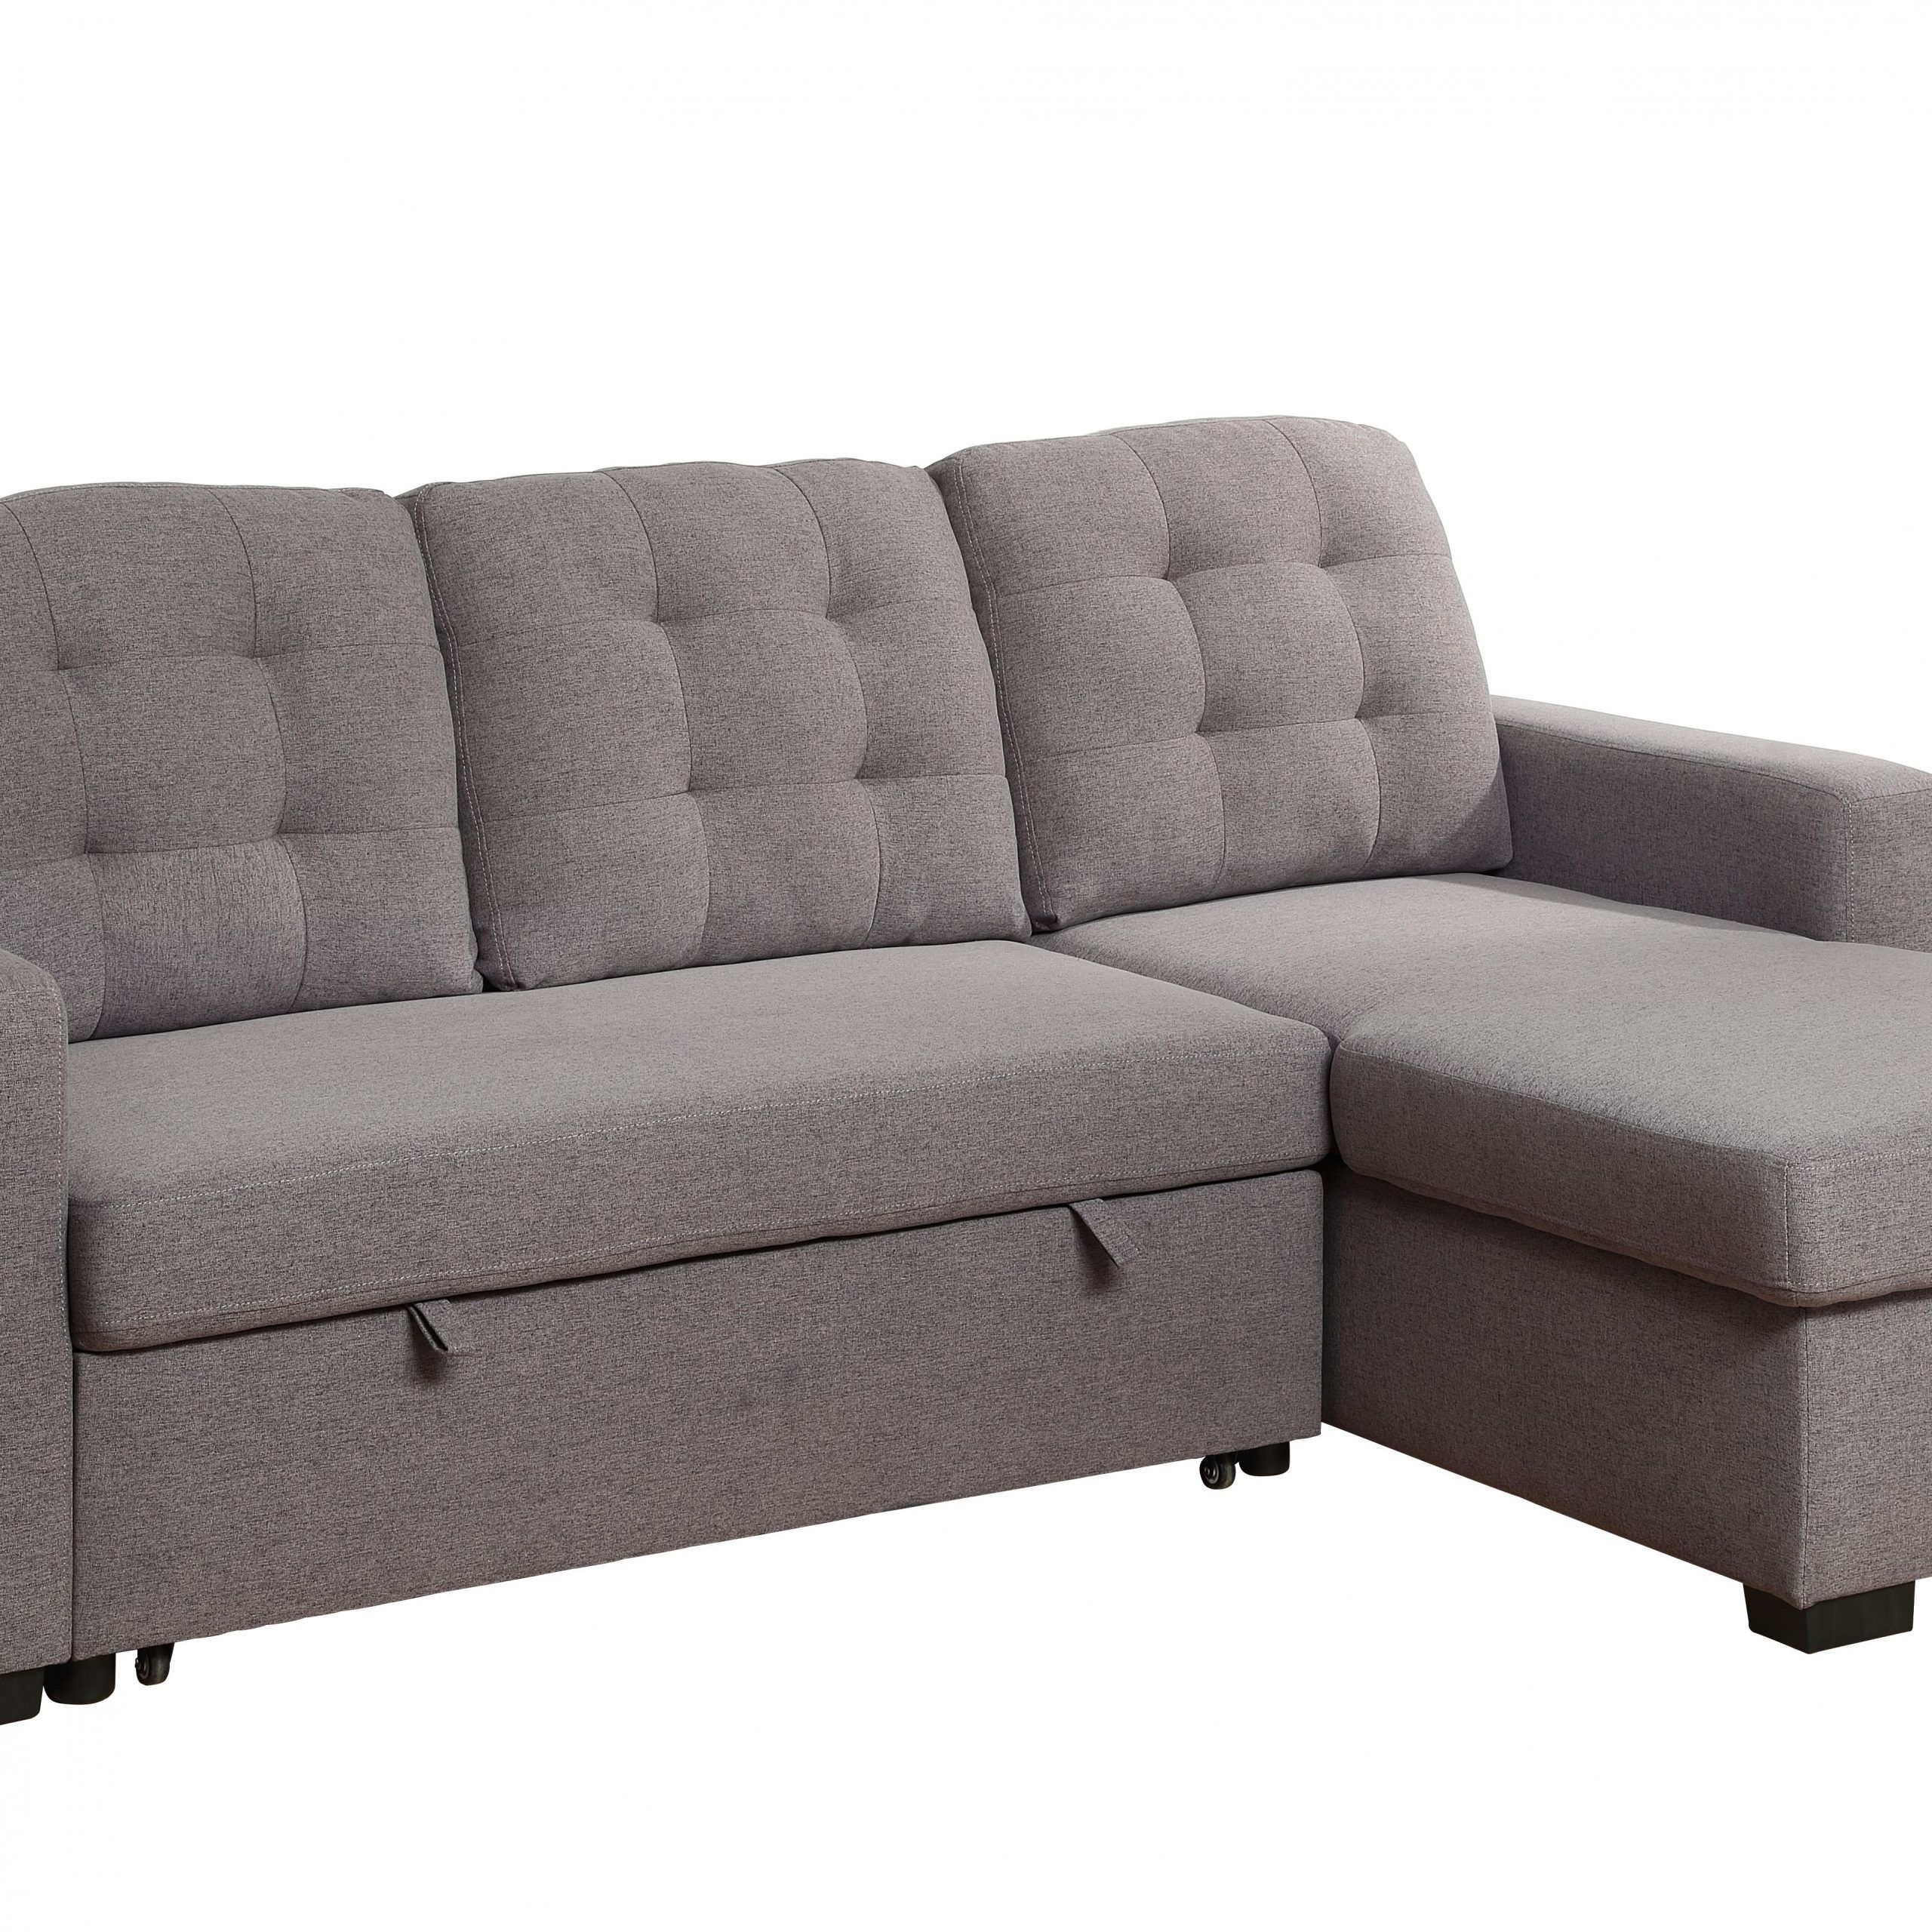 Chambord Reversible Storage Sleeper Sectional Sofa In Gray Regarding Palisades Reversible Small Space Sectional Sofas With Storage (View 13 of 15)